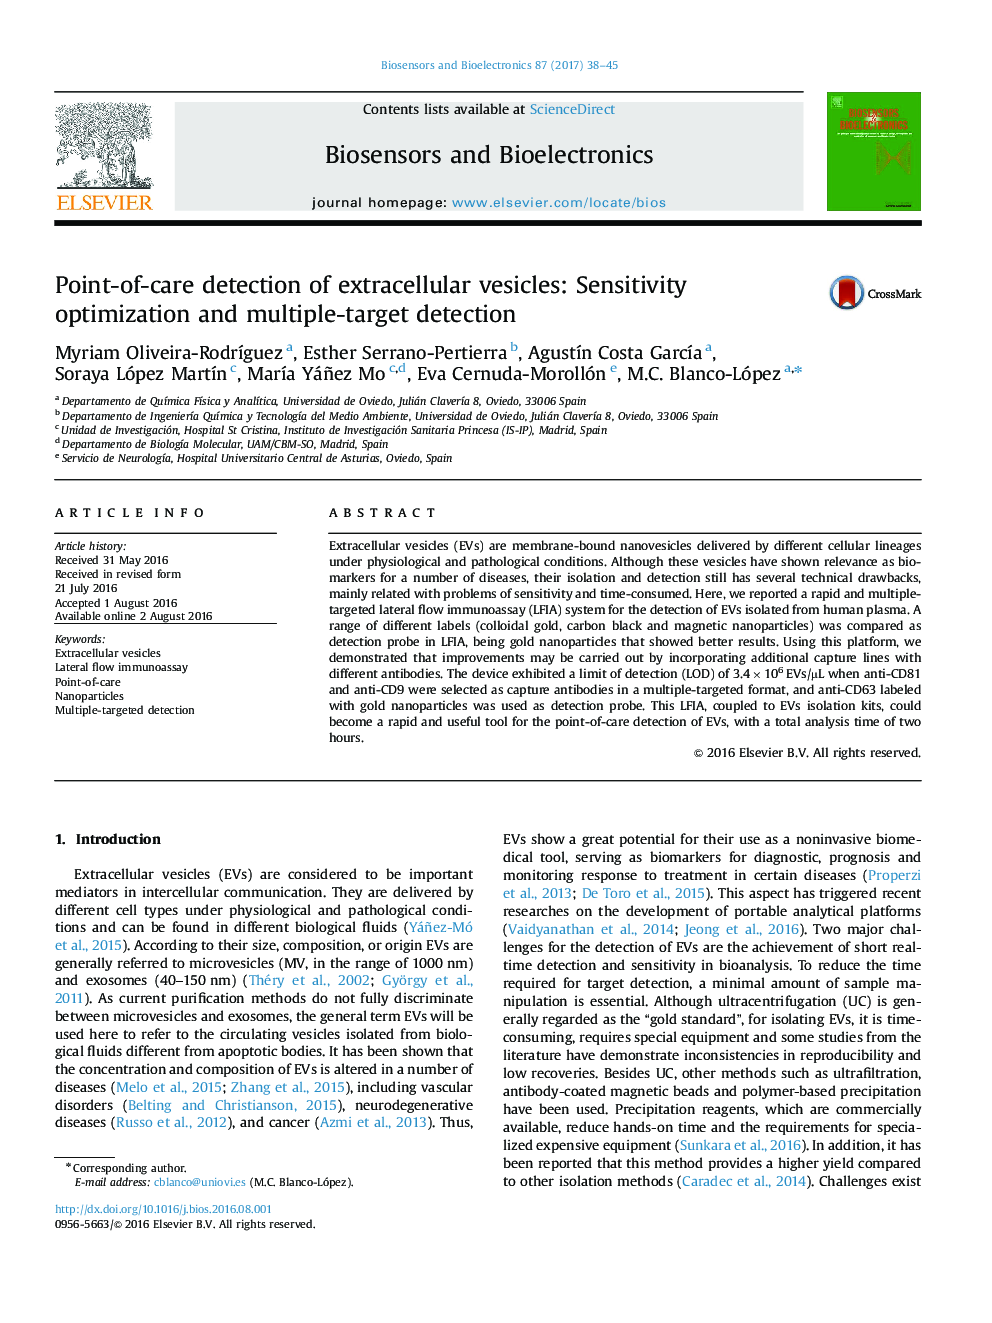 Point-of-care detection of extracellular vesicles: Sensitivity optimization and multiple-target detection